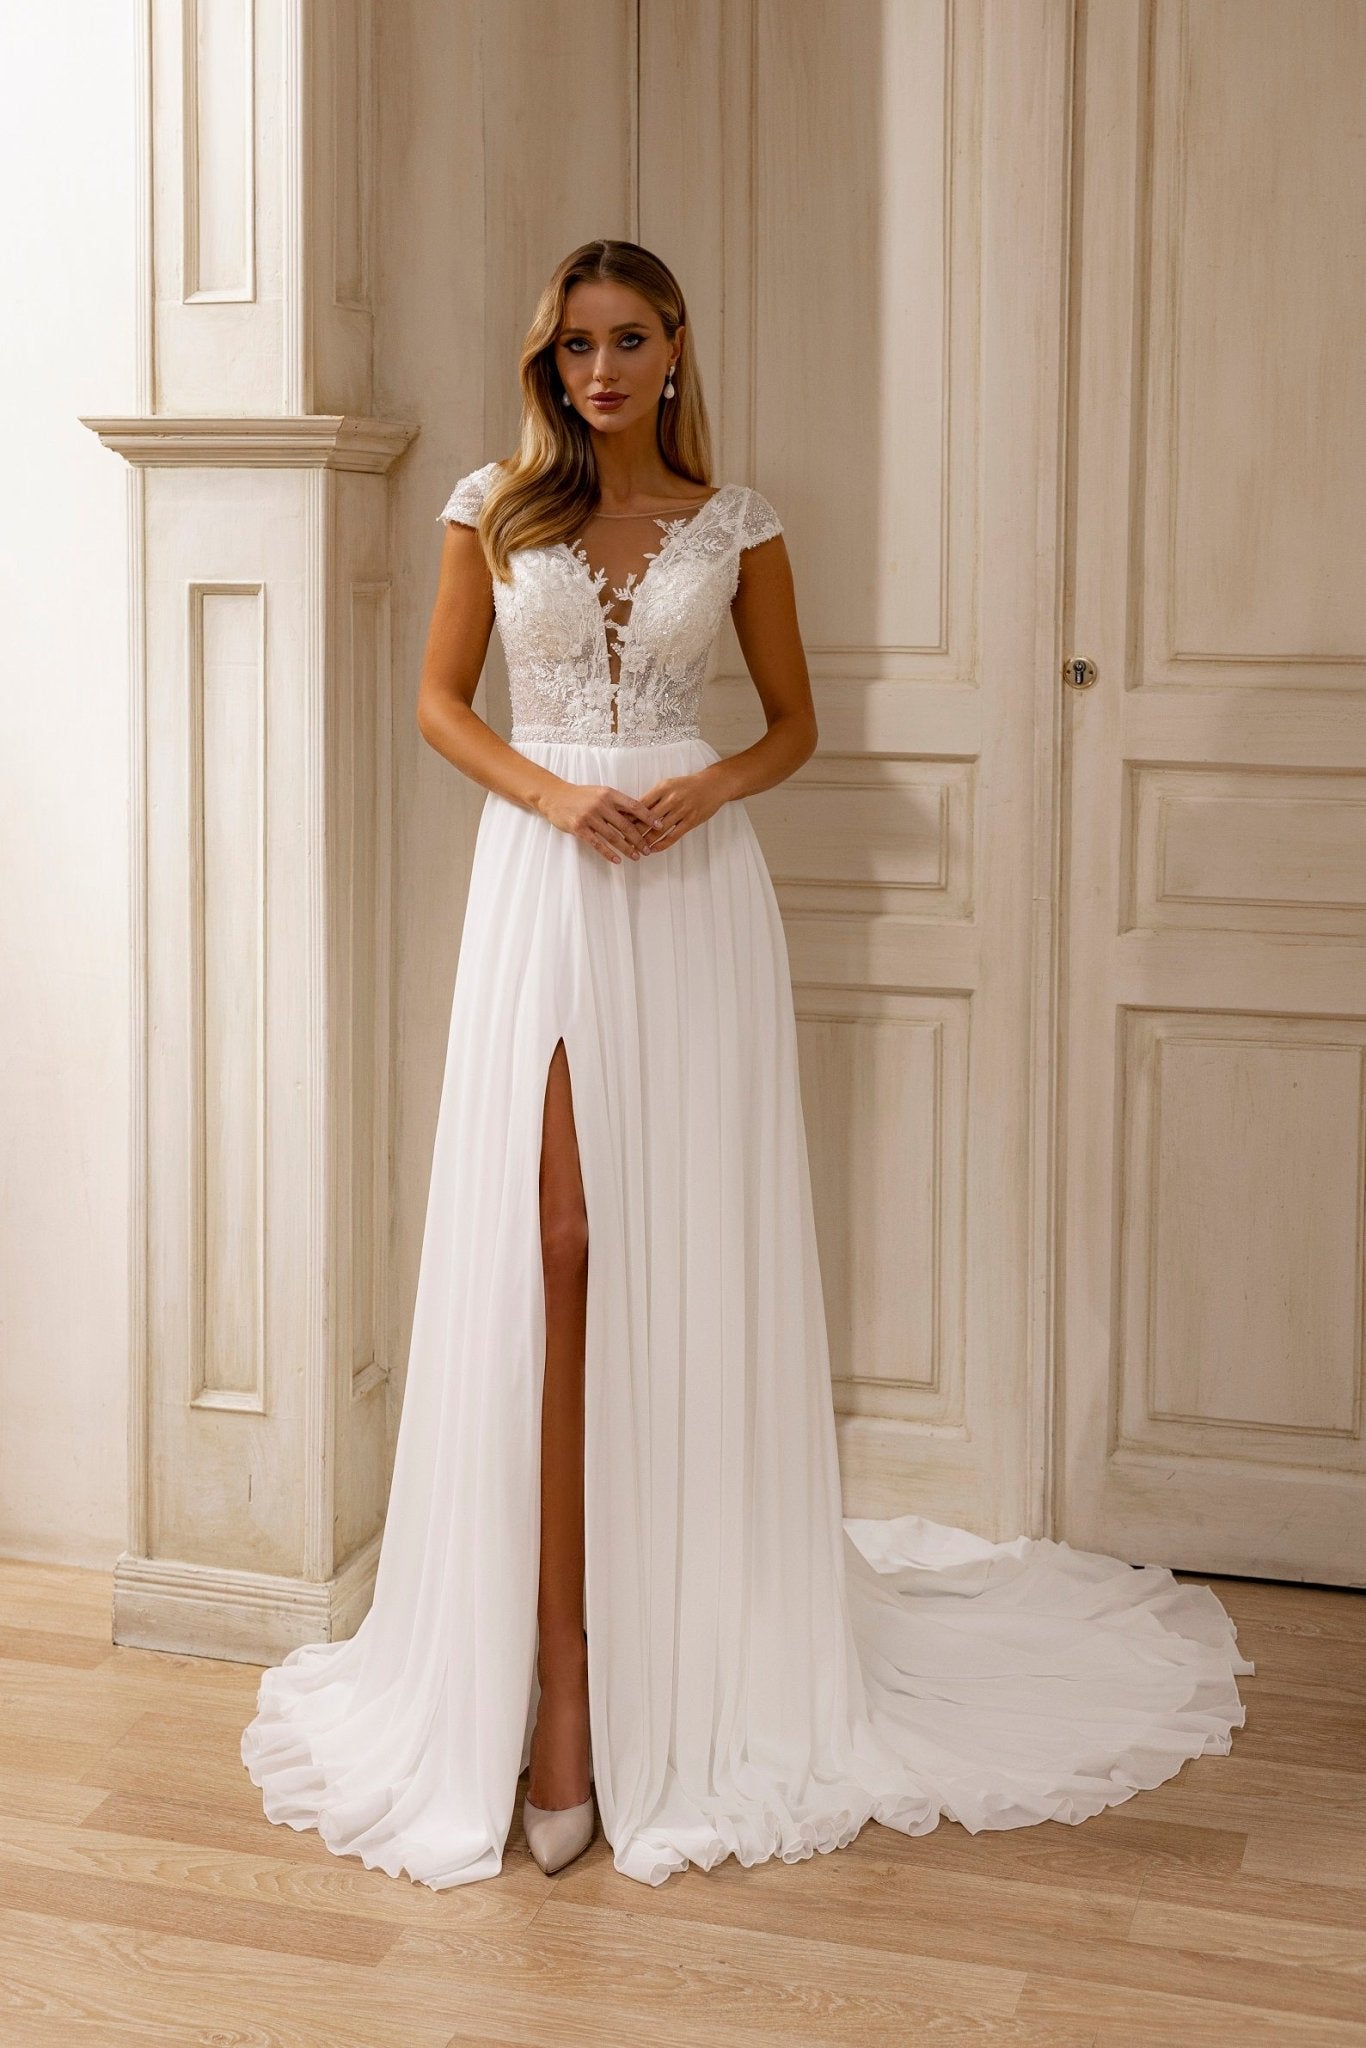 Sophisticated A-Line Wedding Dress with Lace Embellishments and Sheer Overlay Train - WonderlandByLilian